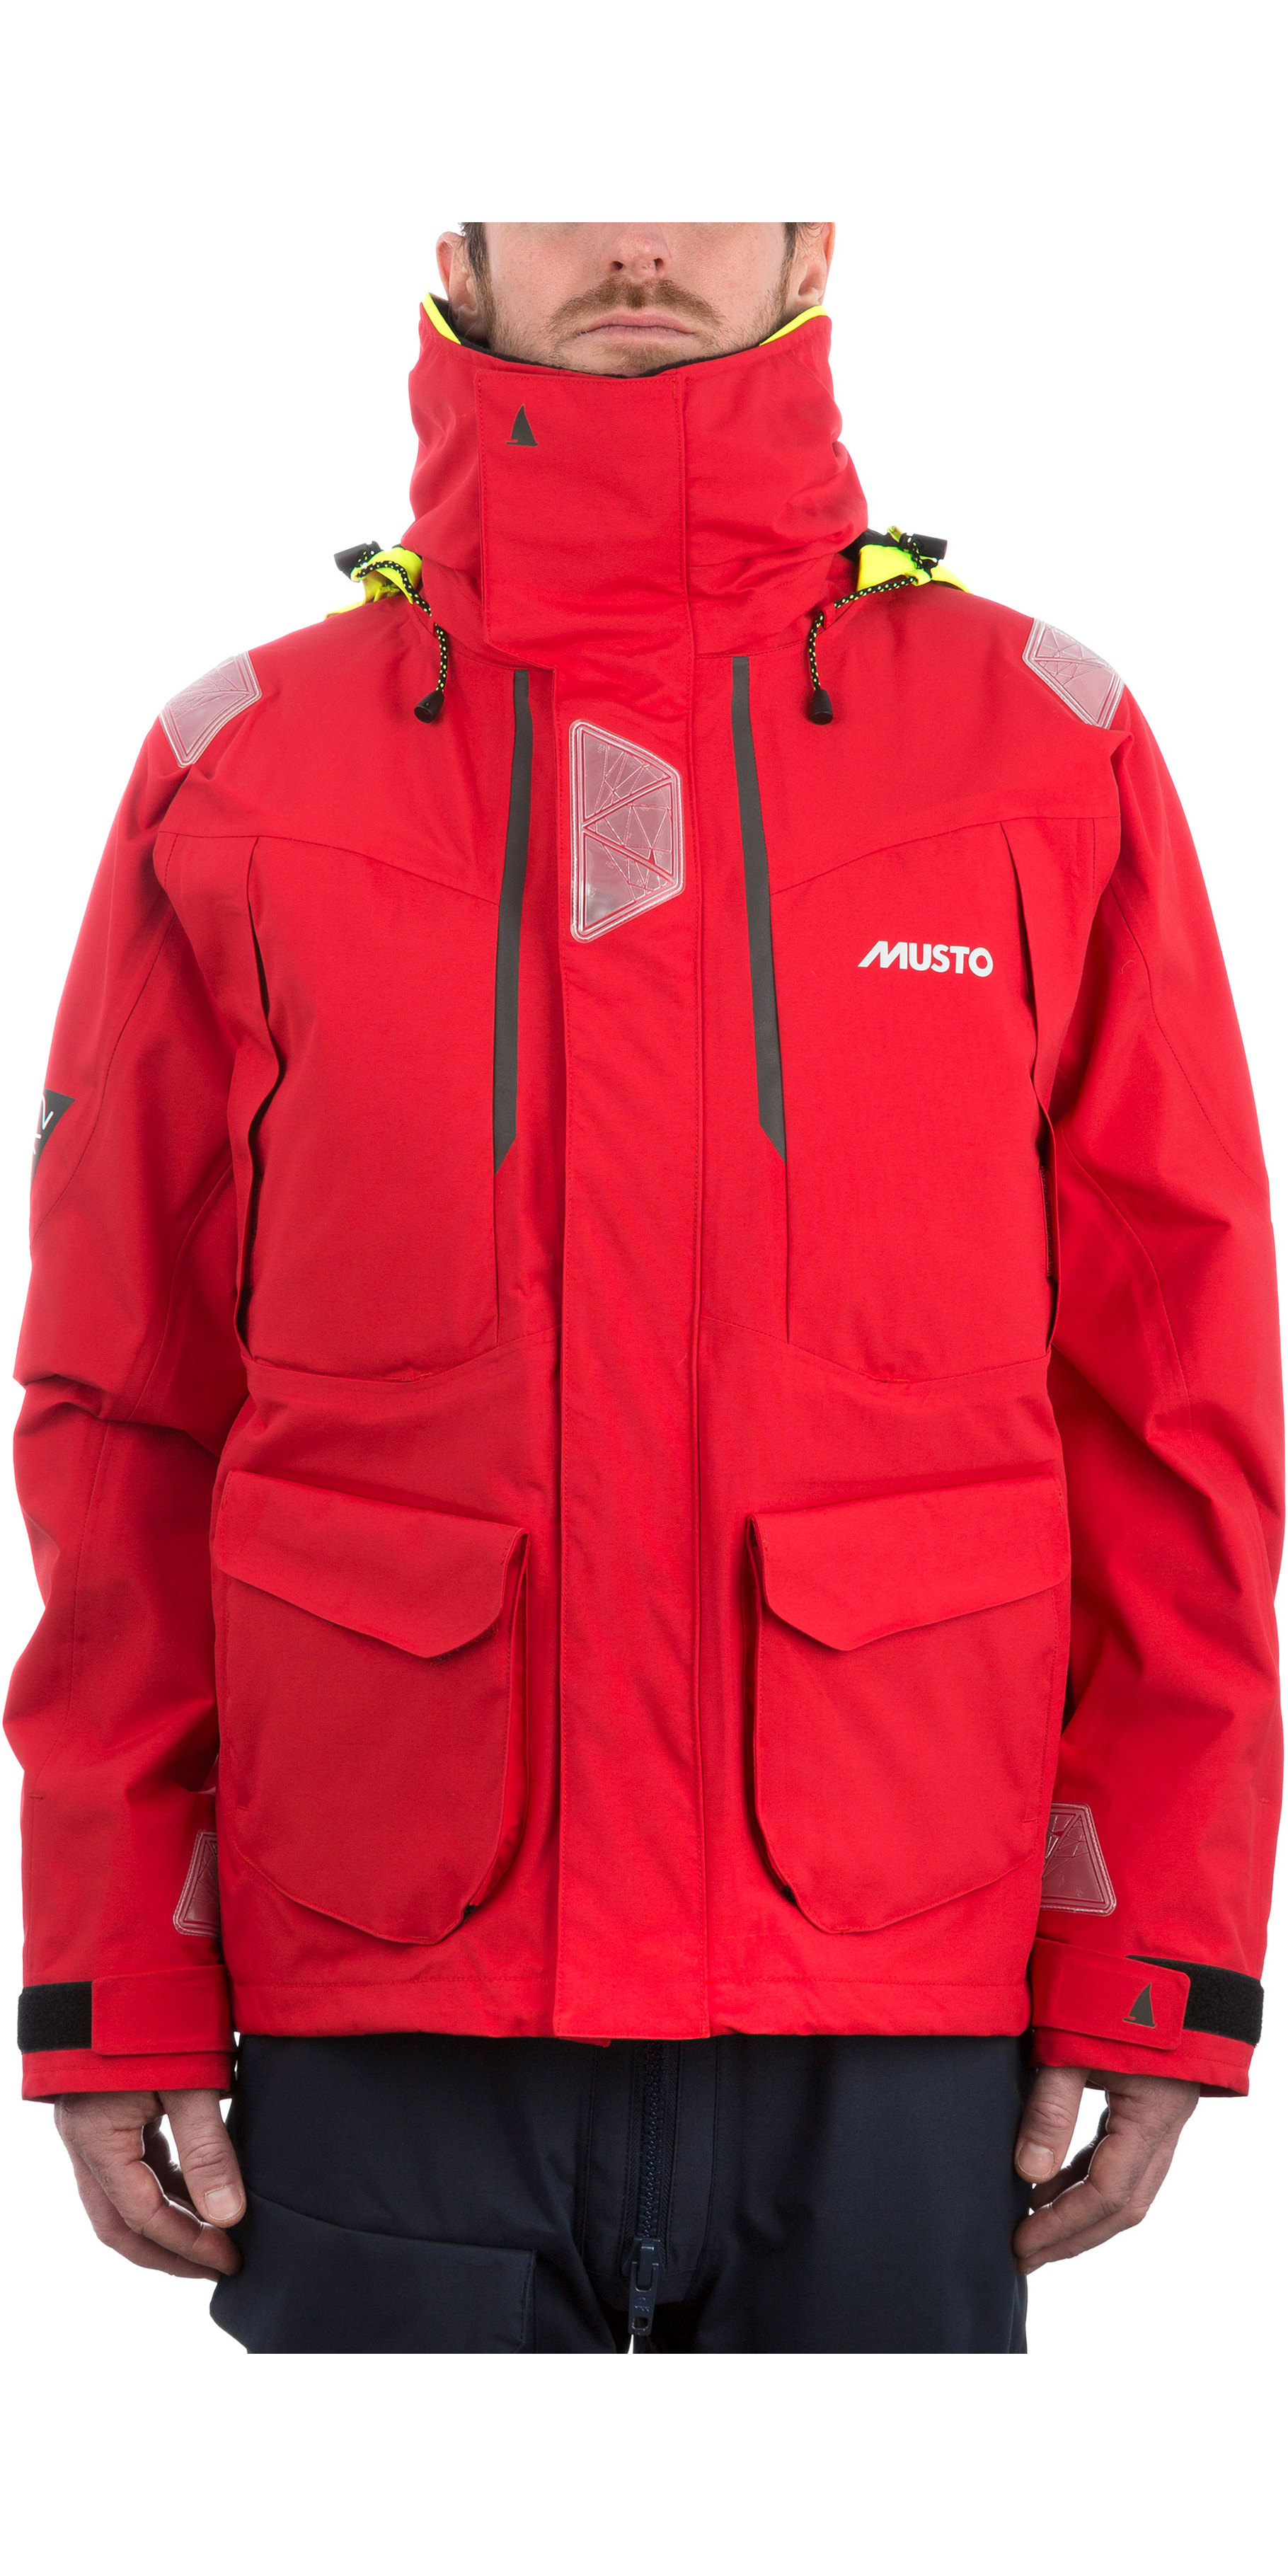 Windproof Musto BR2 Mens Offshore Waterproof and Breathable Sailing Jacket SMJK052